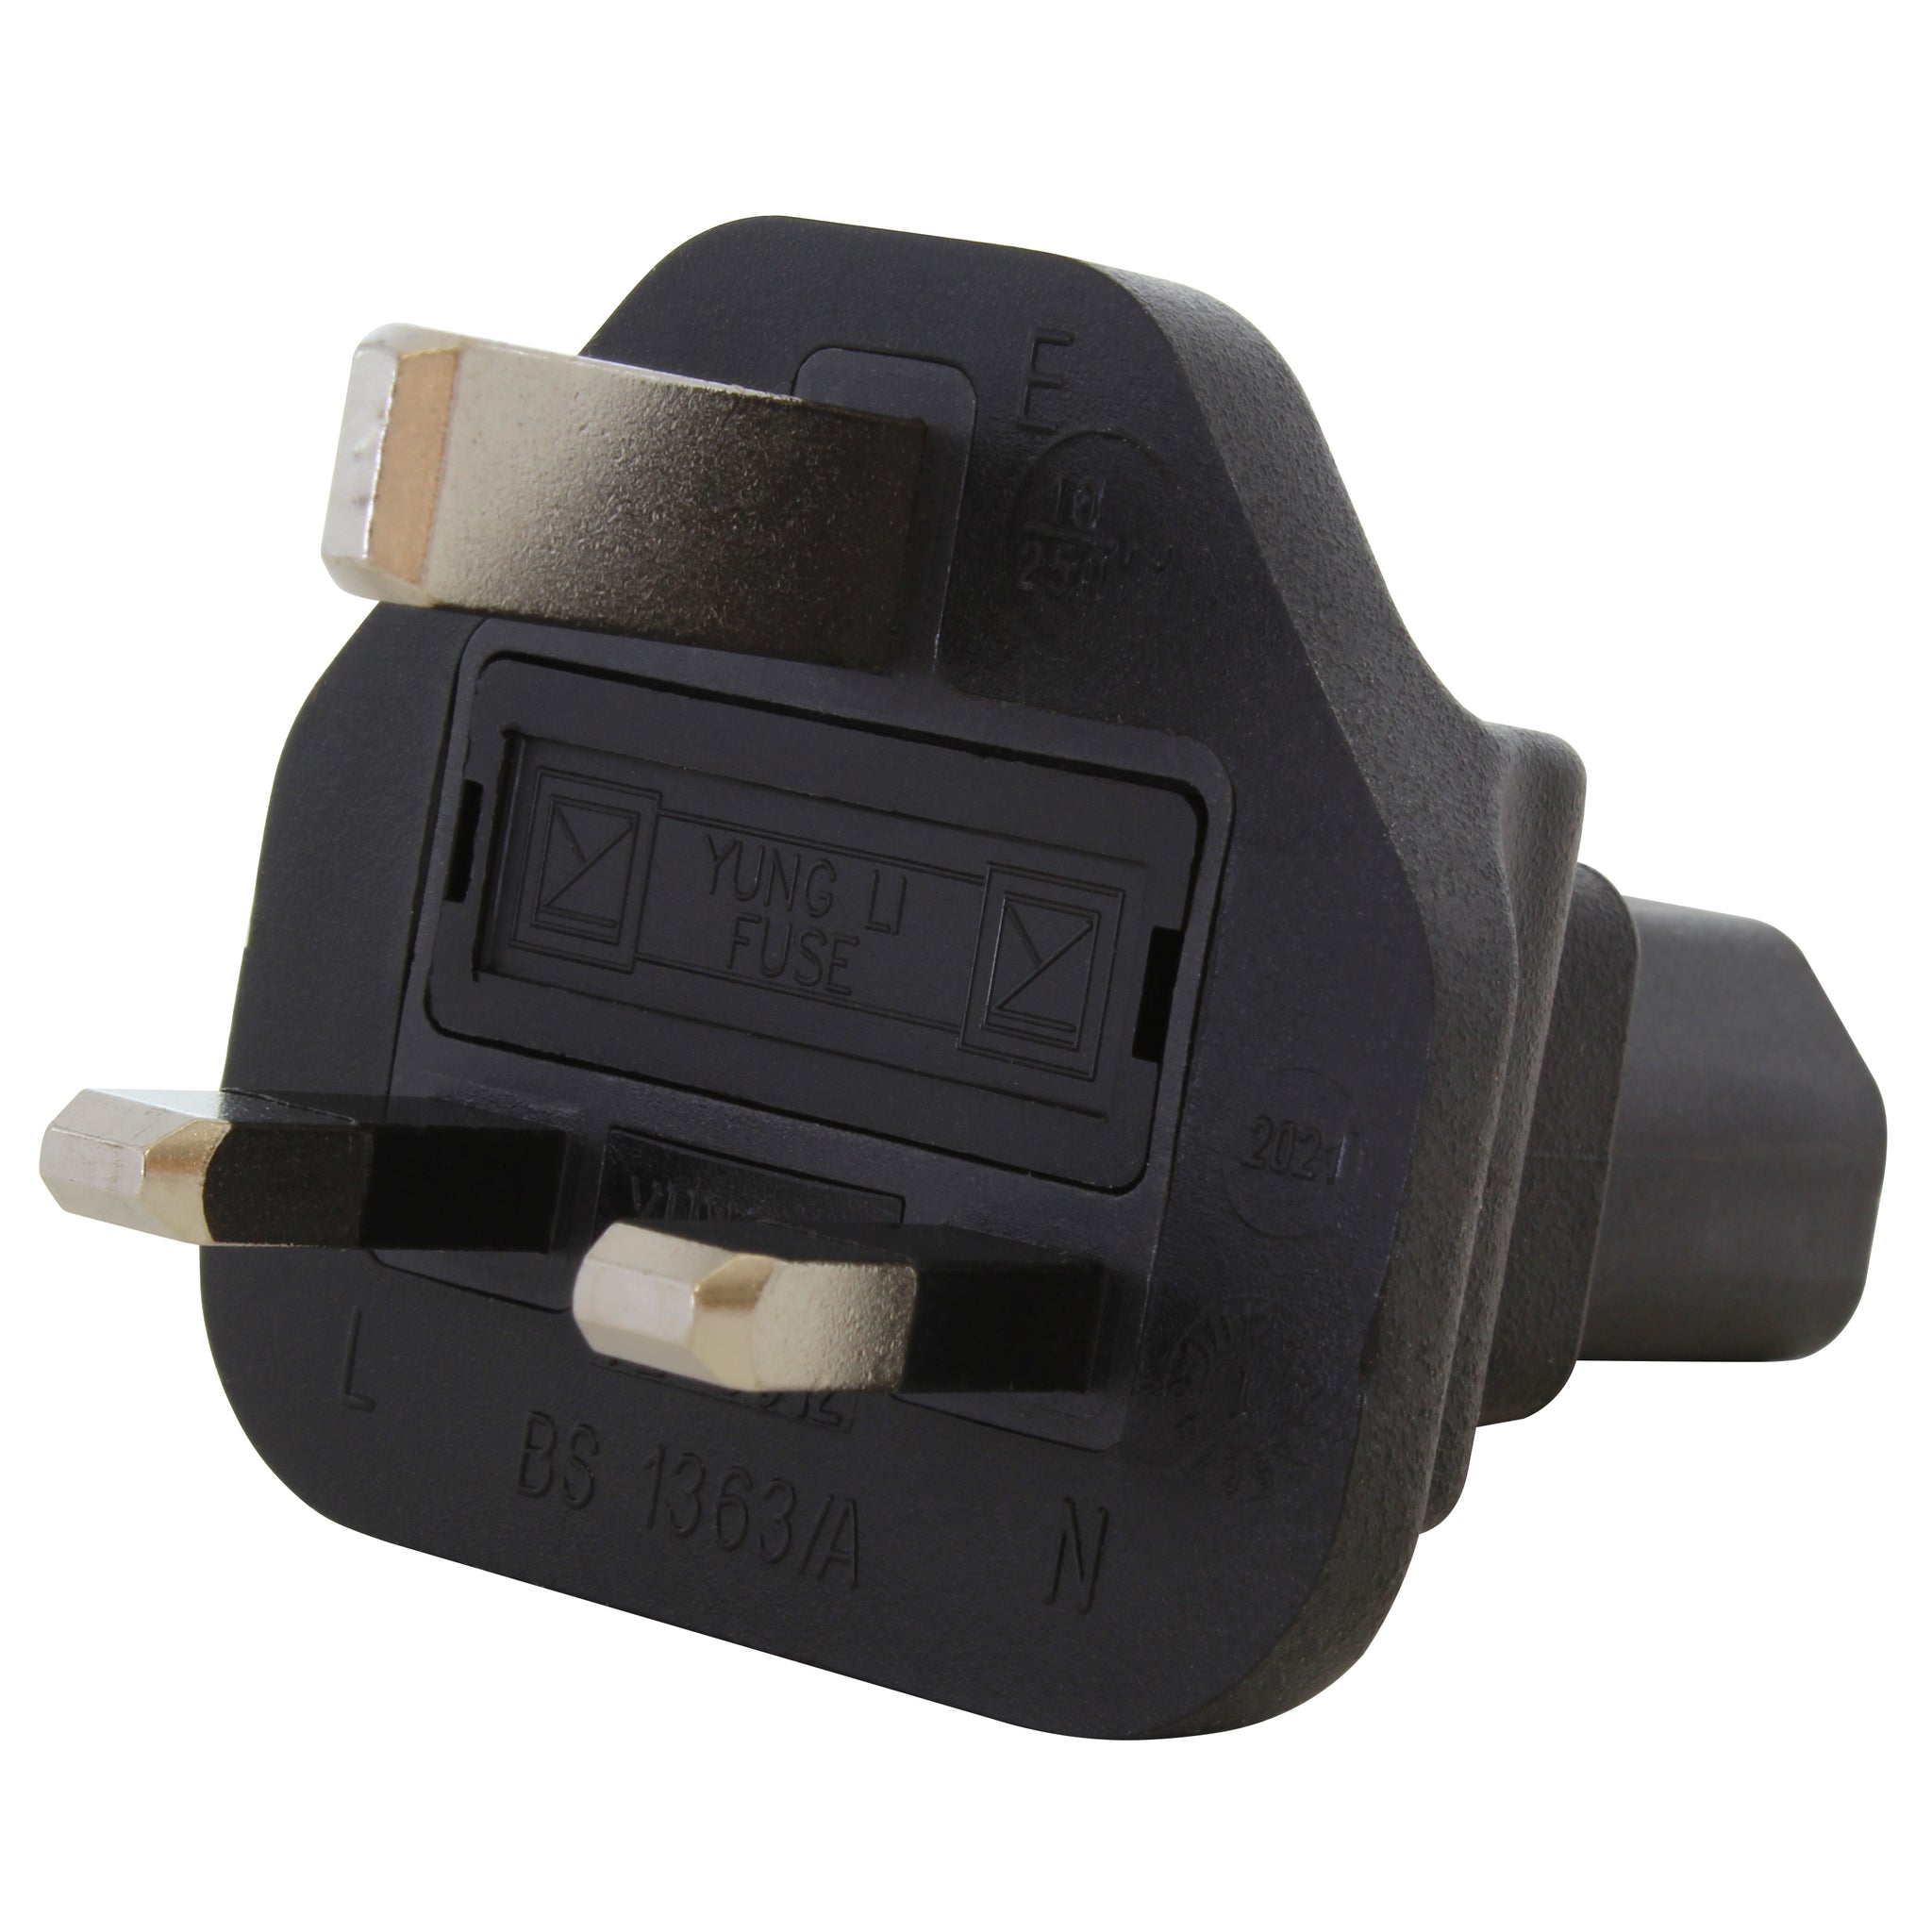 AC WORKS® [ADUKC13] Type G UK BS1363 Plug to IEC C13 Connector – AC  Connectors